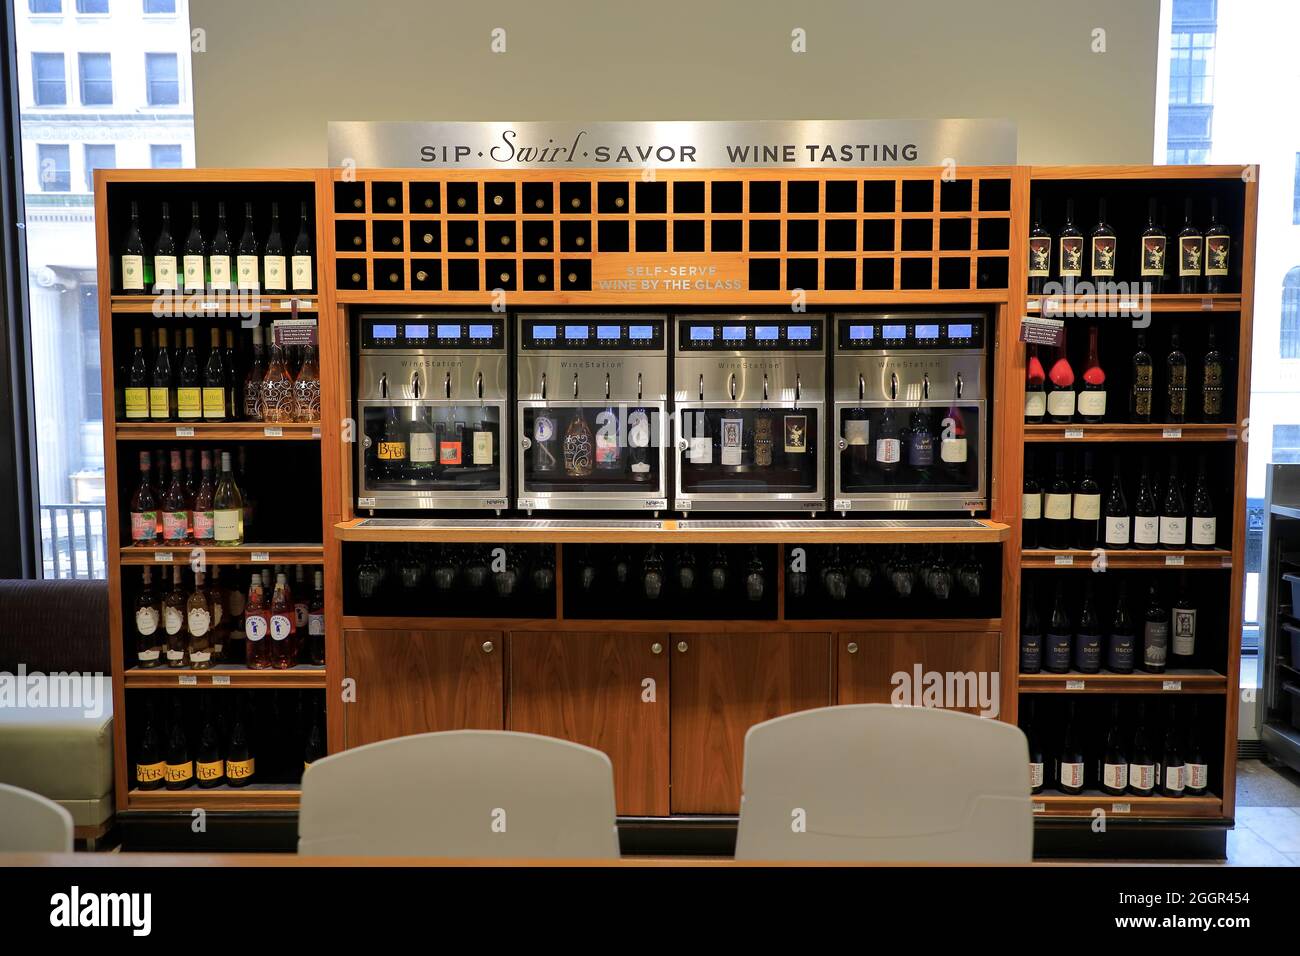 https://c8.alamy.com/comp/2GGR454/self-serve-wine-by-the-glass-wine-tasting-station-inside-heinens-grocery-store-in-downtown-clevelandohiousa-2GGR454.jpg